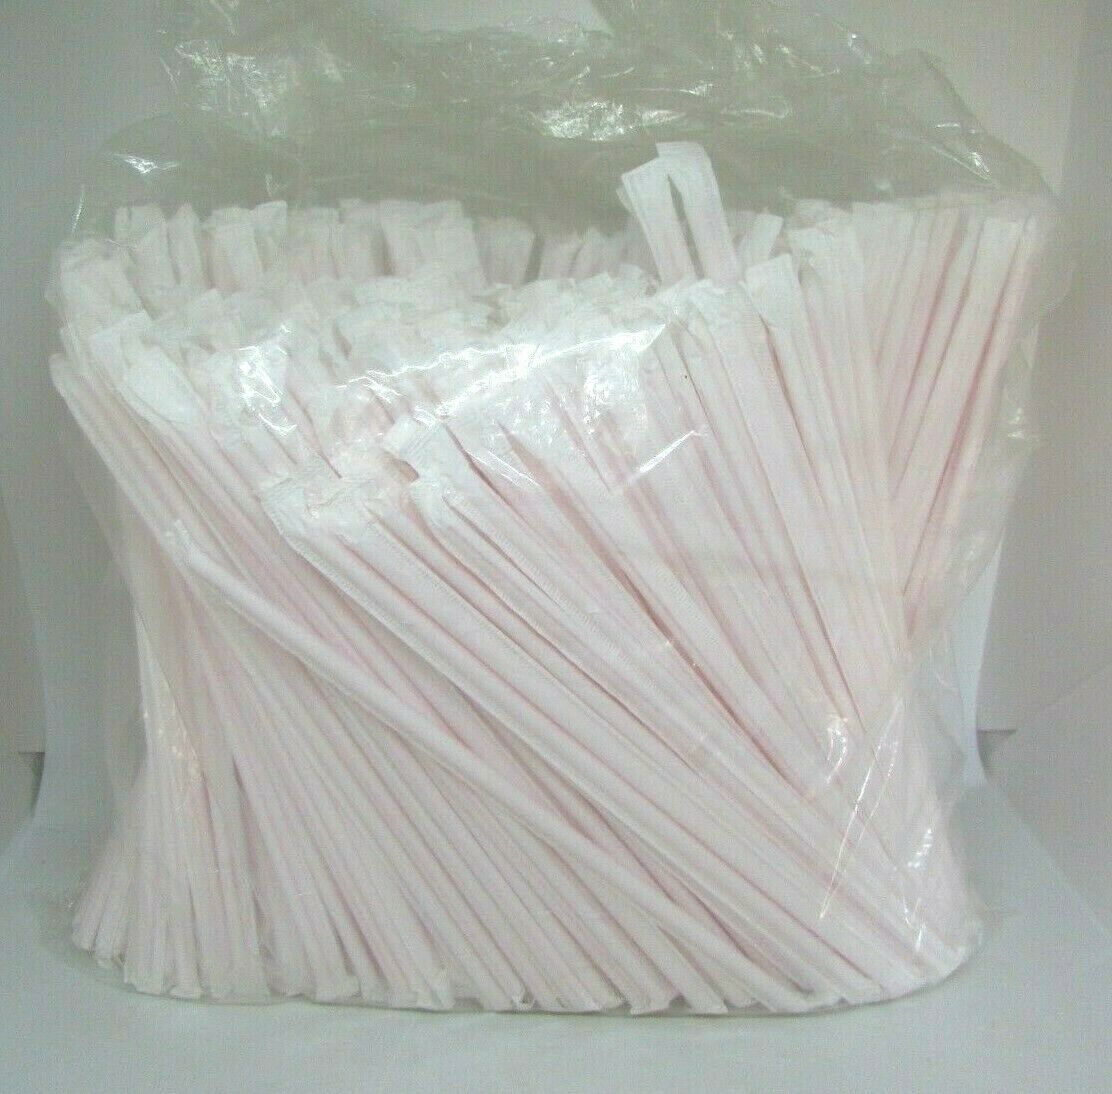 New Individually Wrapped Plastic Straws, Approximately 200+